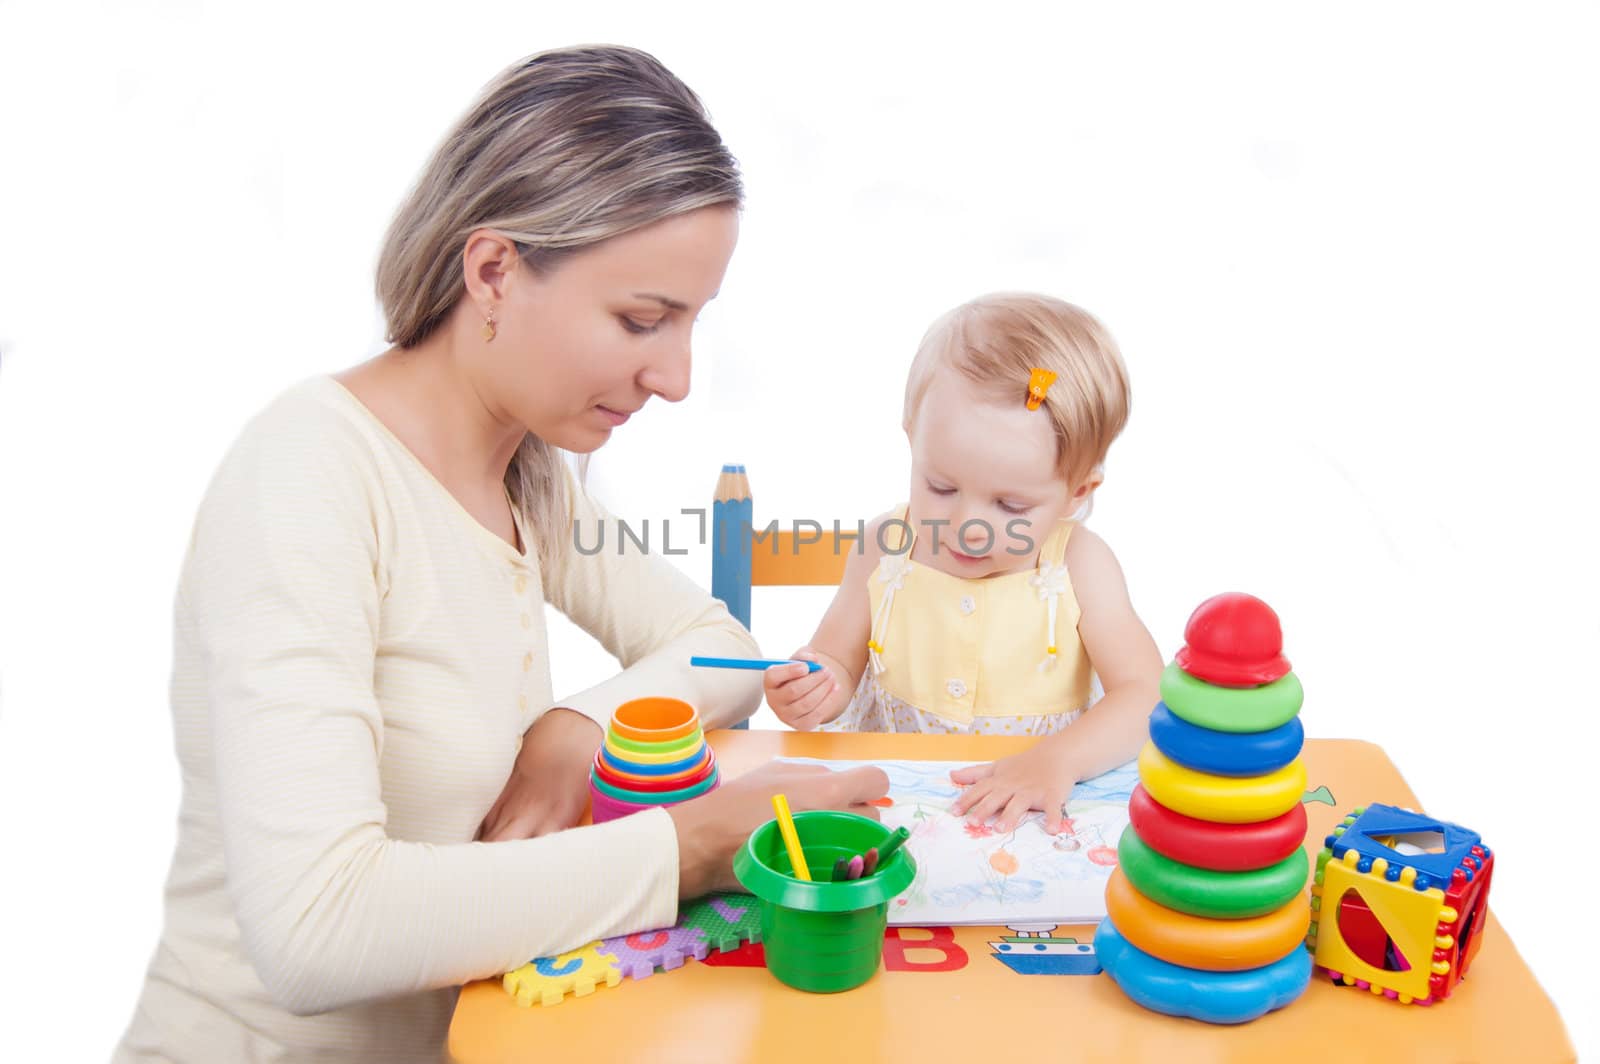 Baby girl drawing with her mother over white